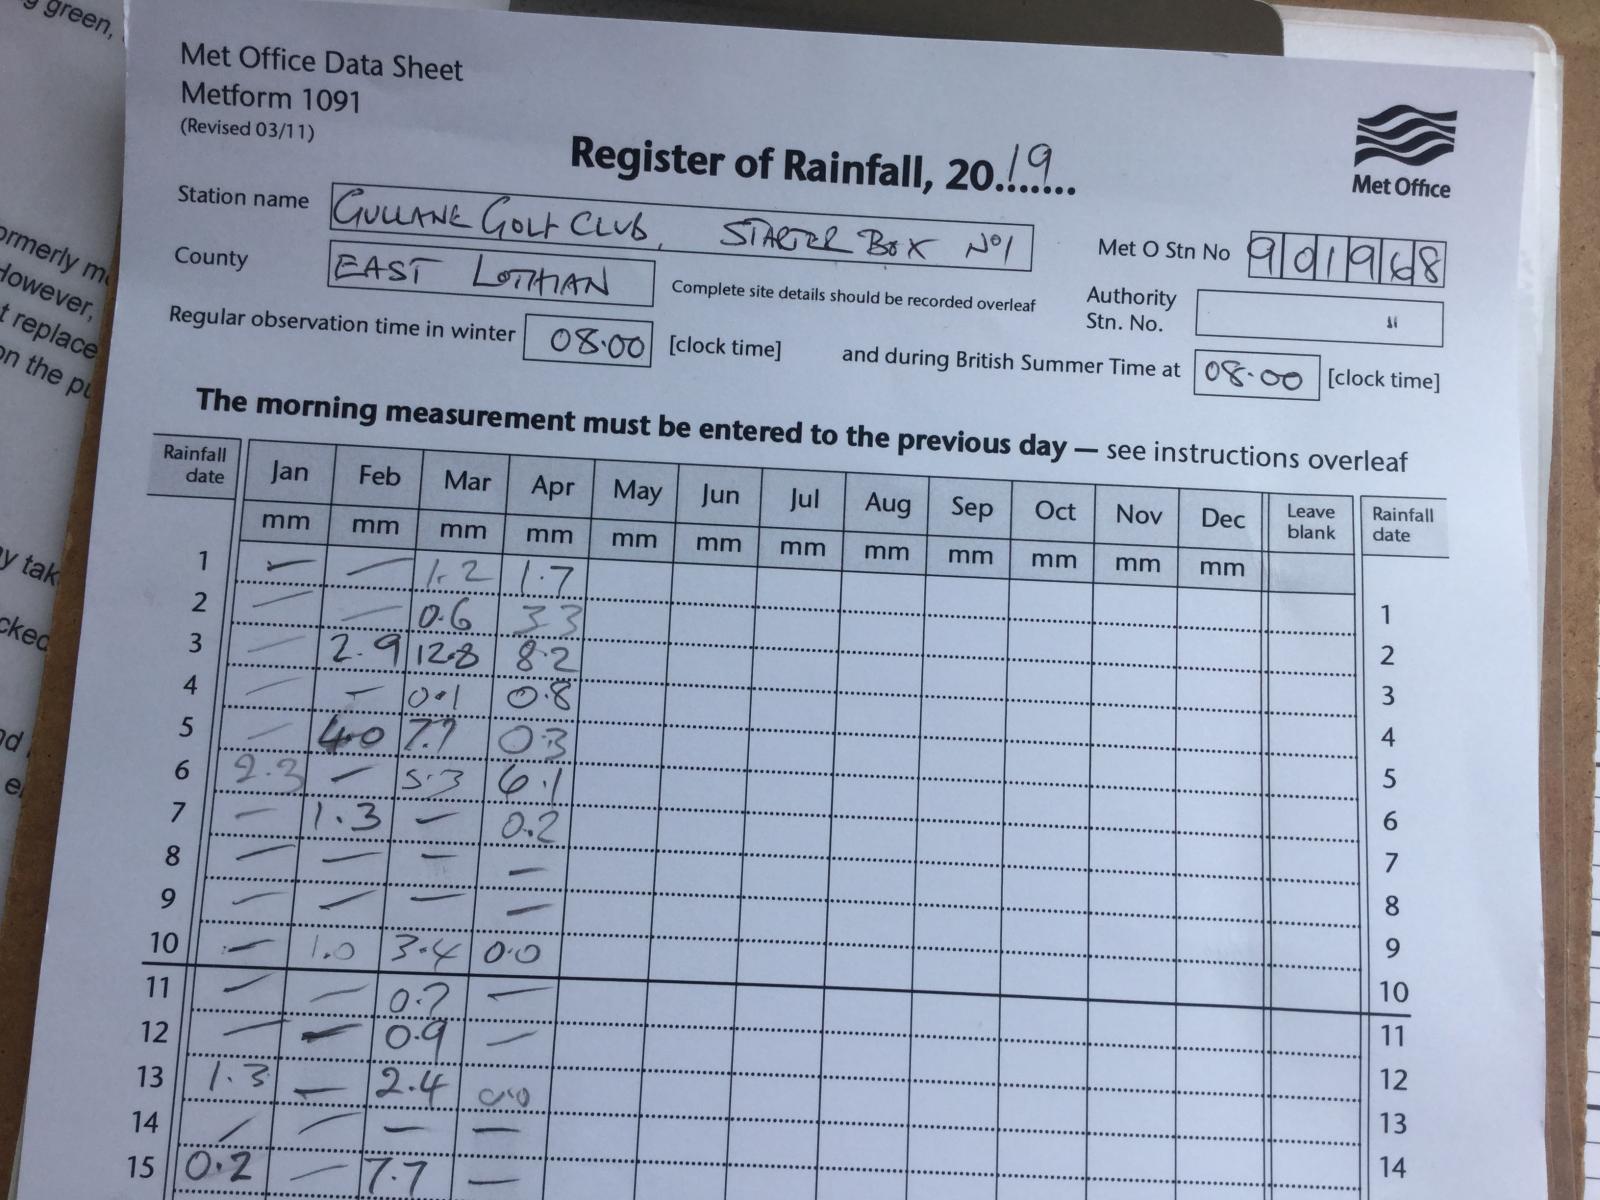 Rainfall records for course 